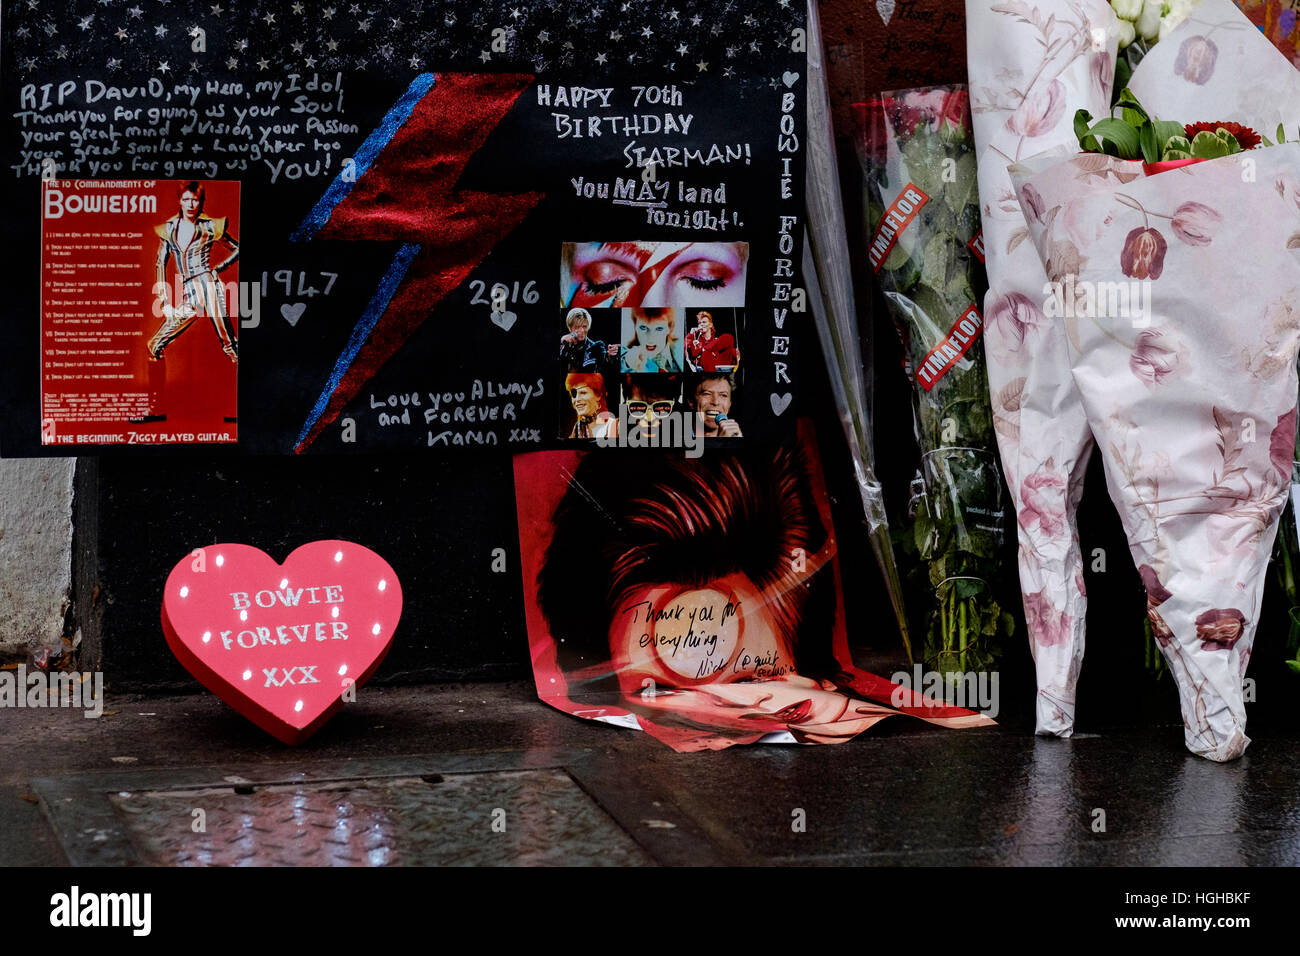 Tributes at the David Bowie Memorial Mural on what would have been his 70th birthday on 08/01/2017 at Brixton, . Pictured: Fans wrote notes, lit candels and left flowers for Bowie who dies almost a year ago. His final album 'Blackstar' was released exactly a year ago on his 69th birthday. Stock Photo